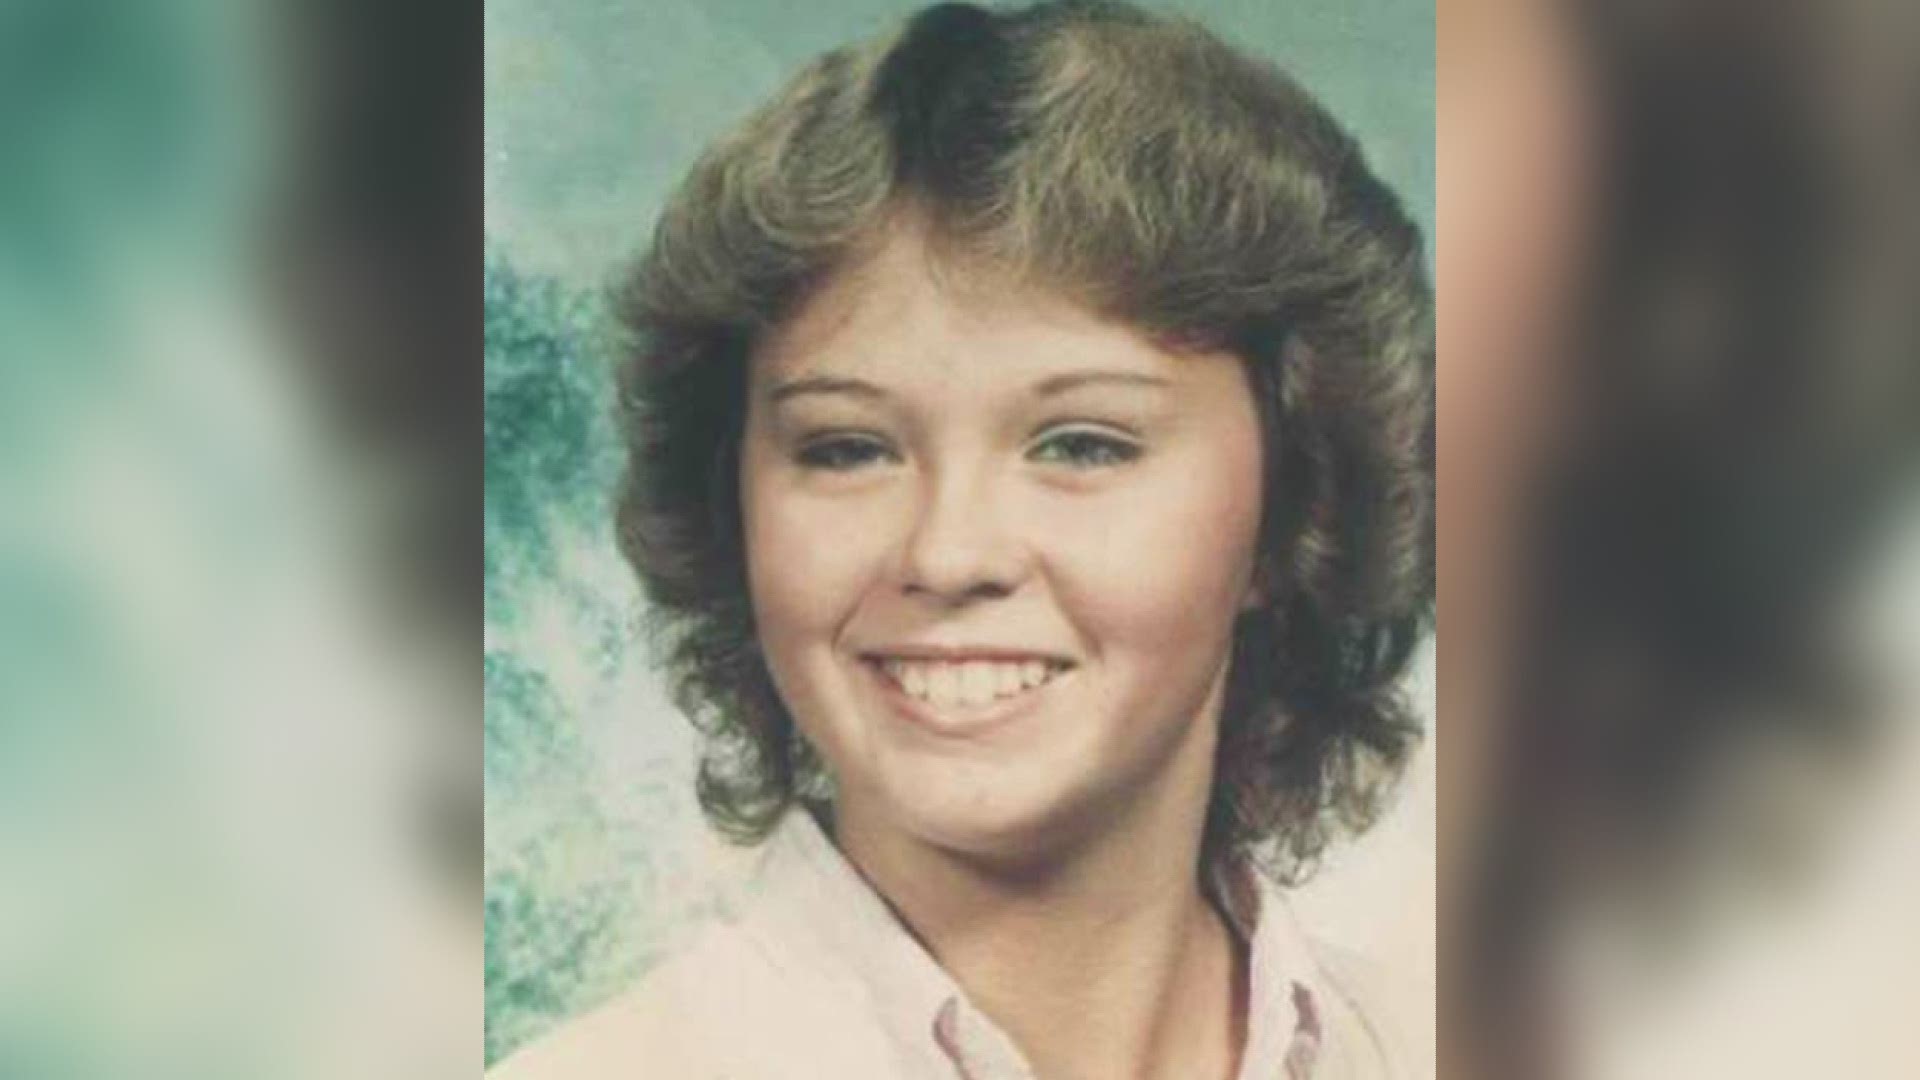 Kimberly Moreau has been missing from Jay, Maine for 33 years and her father continues to search for her. Neither Richard Moreau nor State Police would speak in detail about the new tip, but Moreau believes he is the closest he's ever been to finding his daughter, Kim.